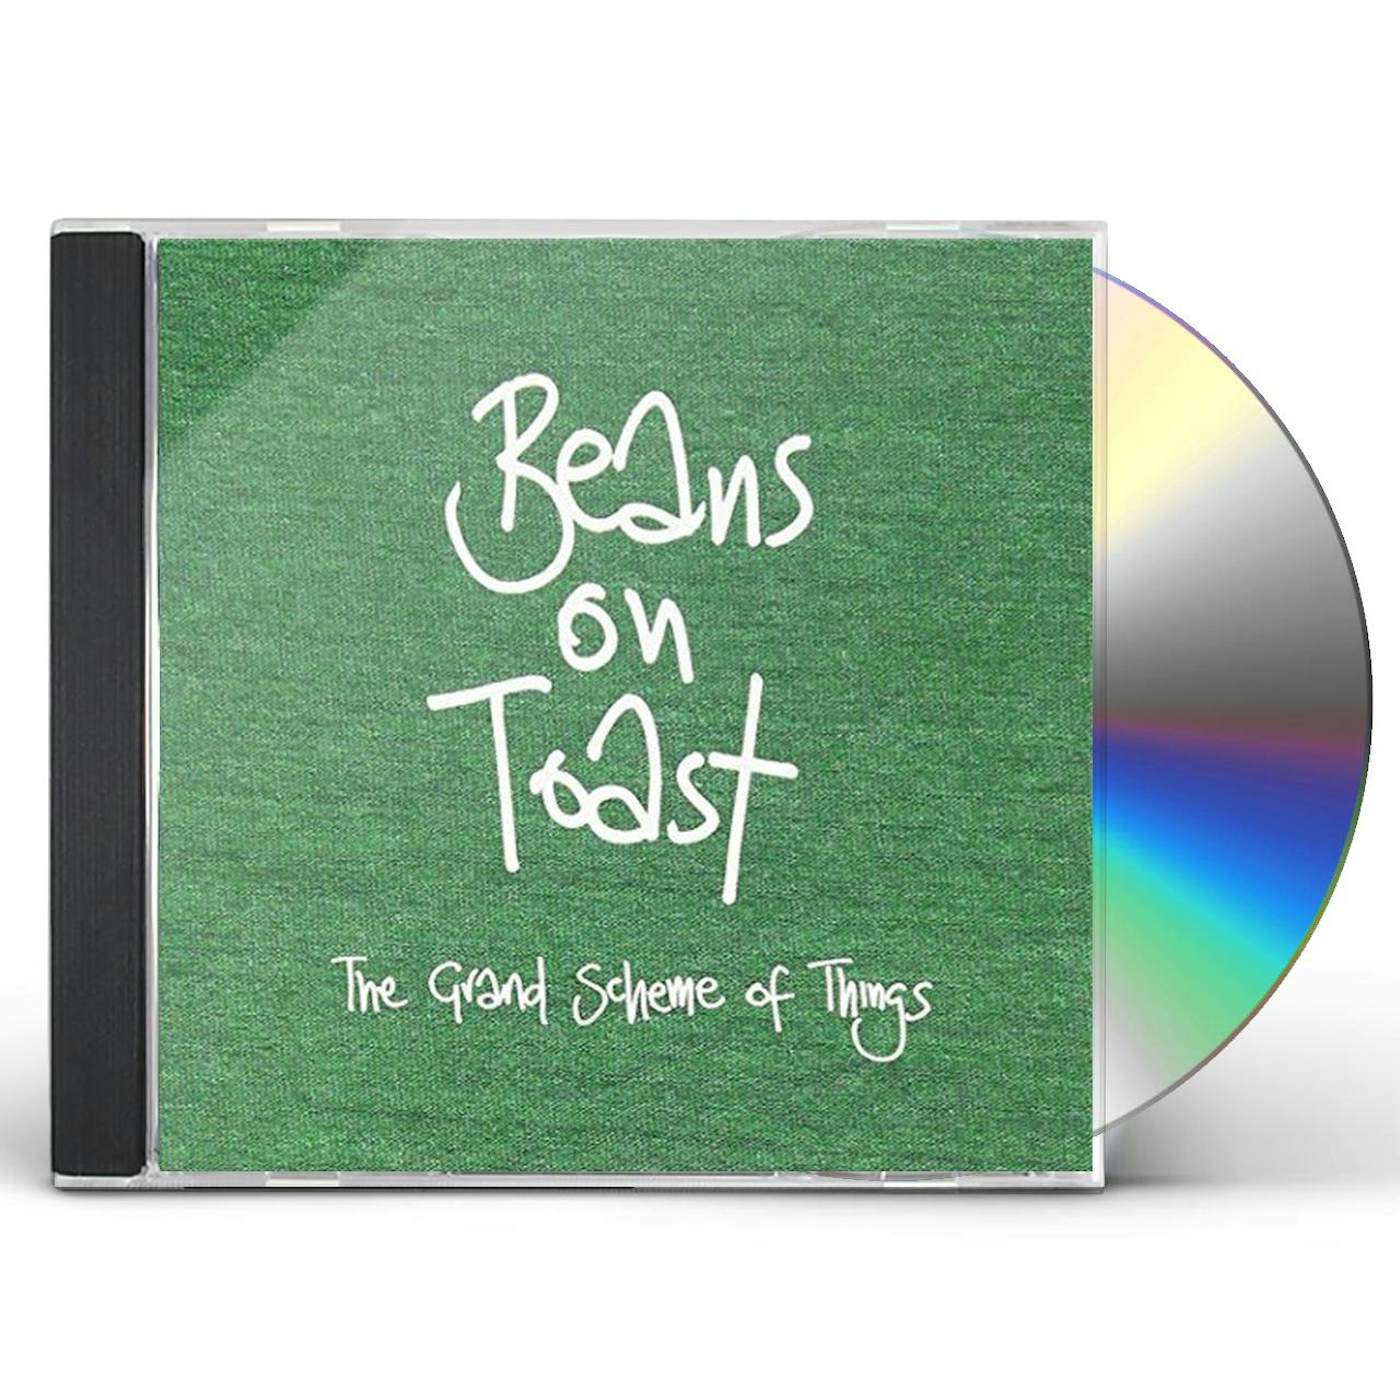 Beans on Toast GRAND SCHEME OF THINGS CD